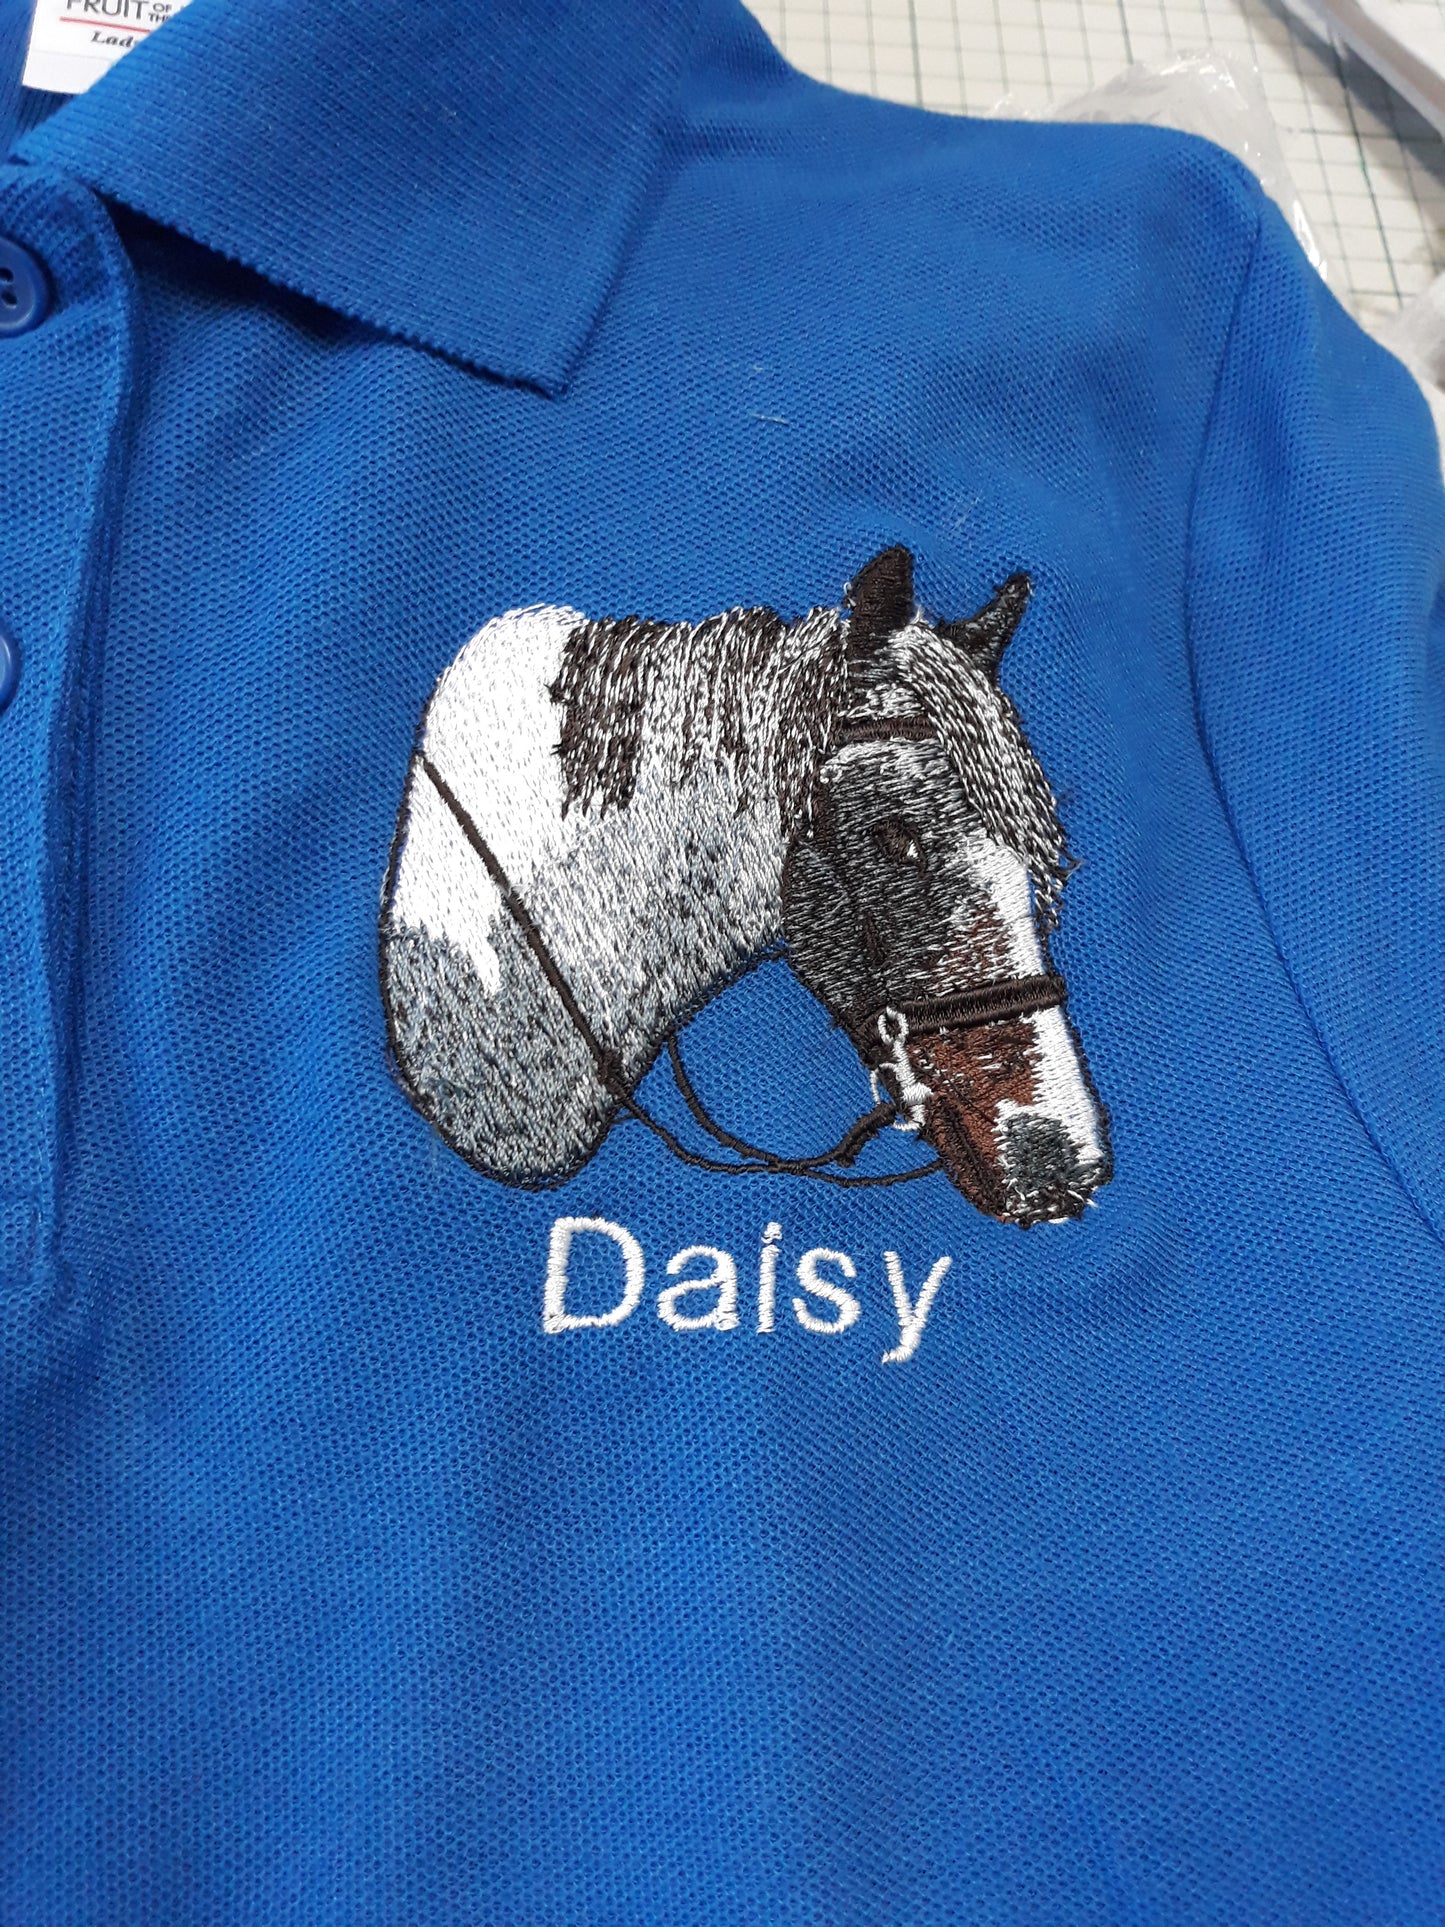 Personalise equestrian polo shirt , personalised equestrian wear, horse polo shirt, horse hoodies